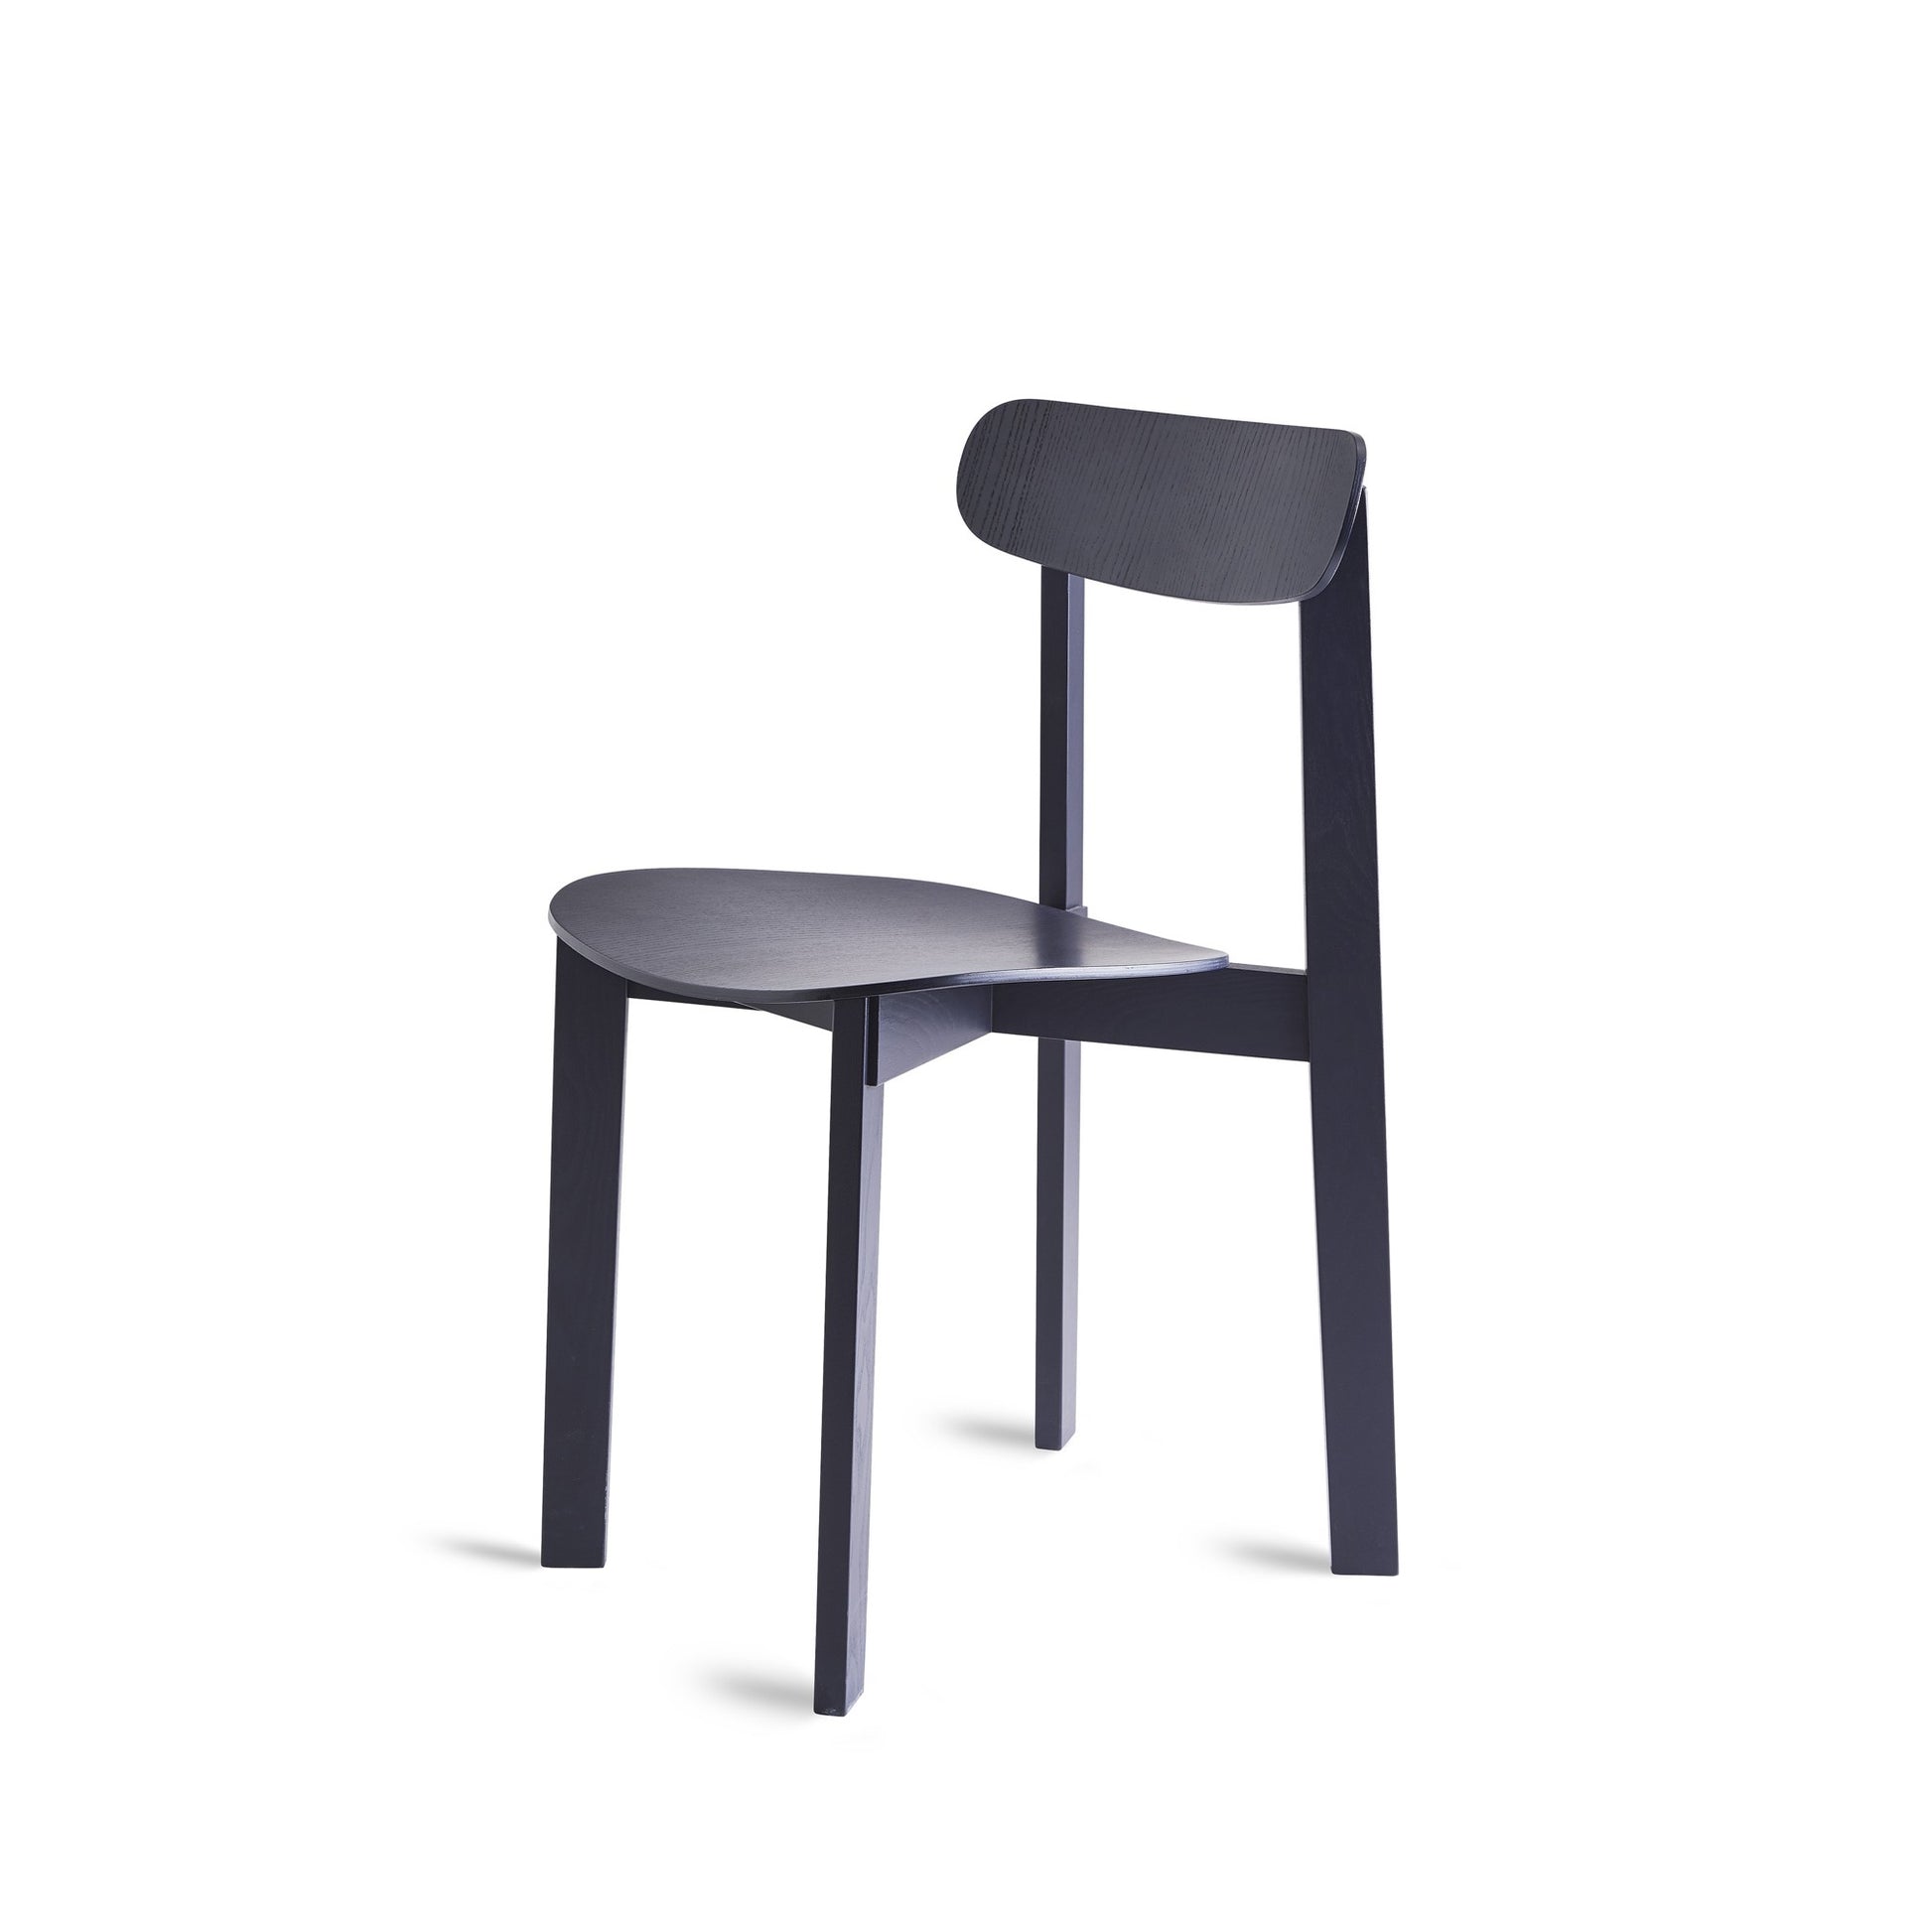 Bondi Dining Chair by Please wait to be seated #Navy Blue